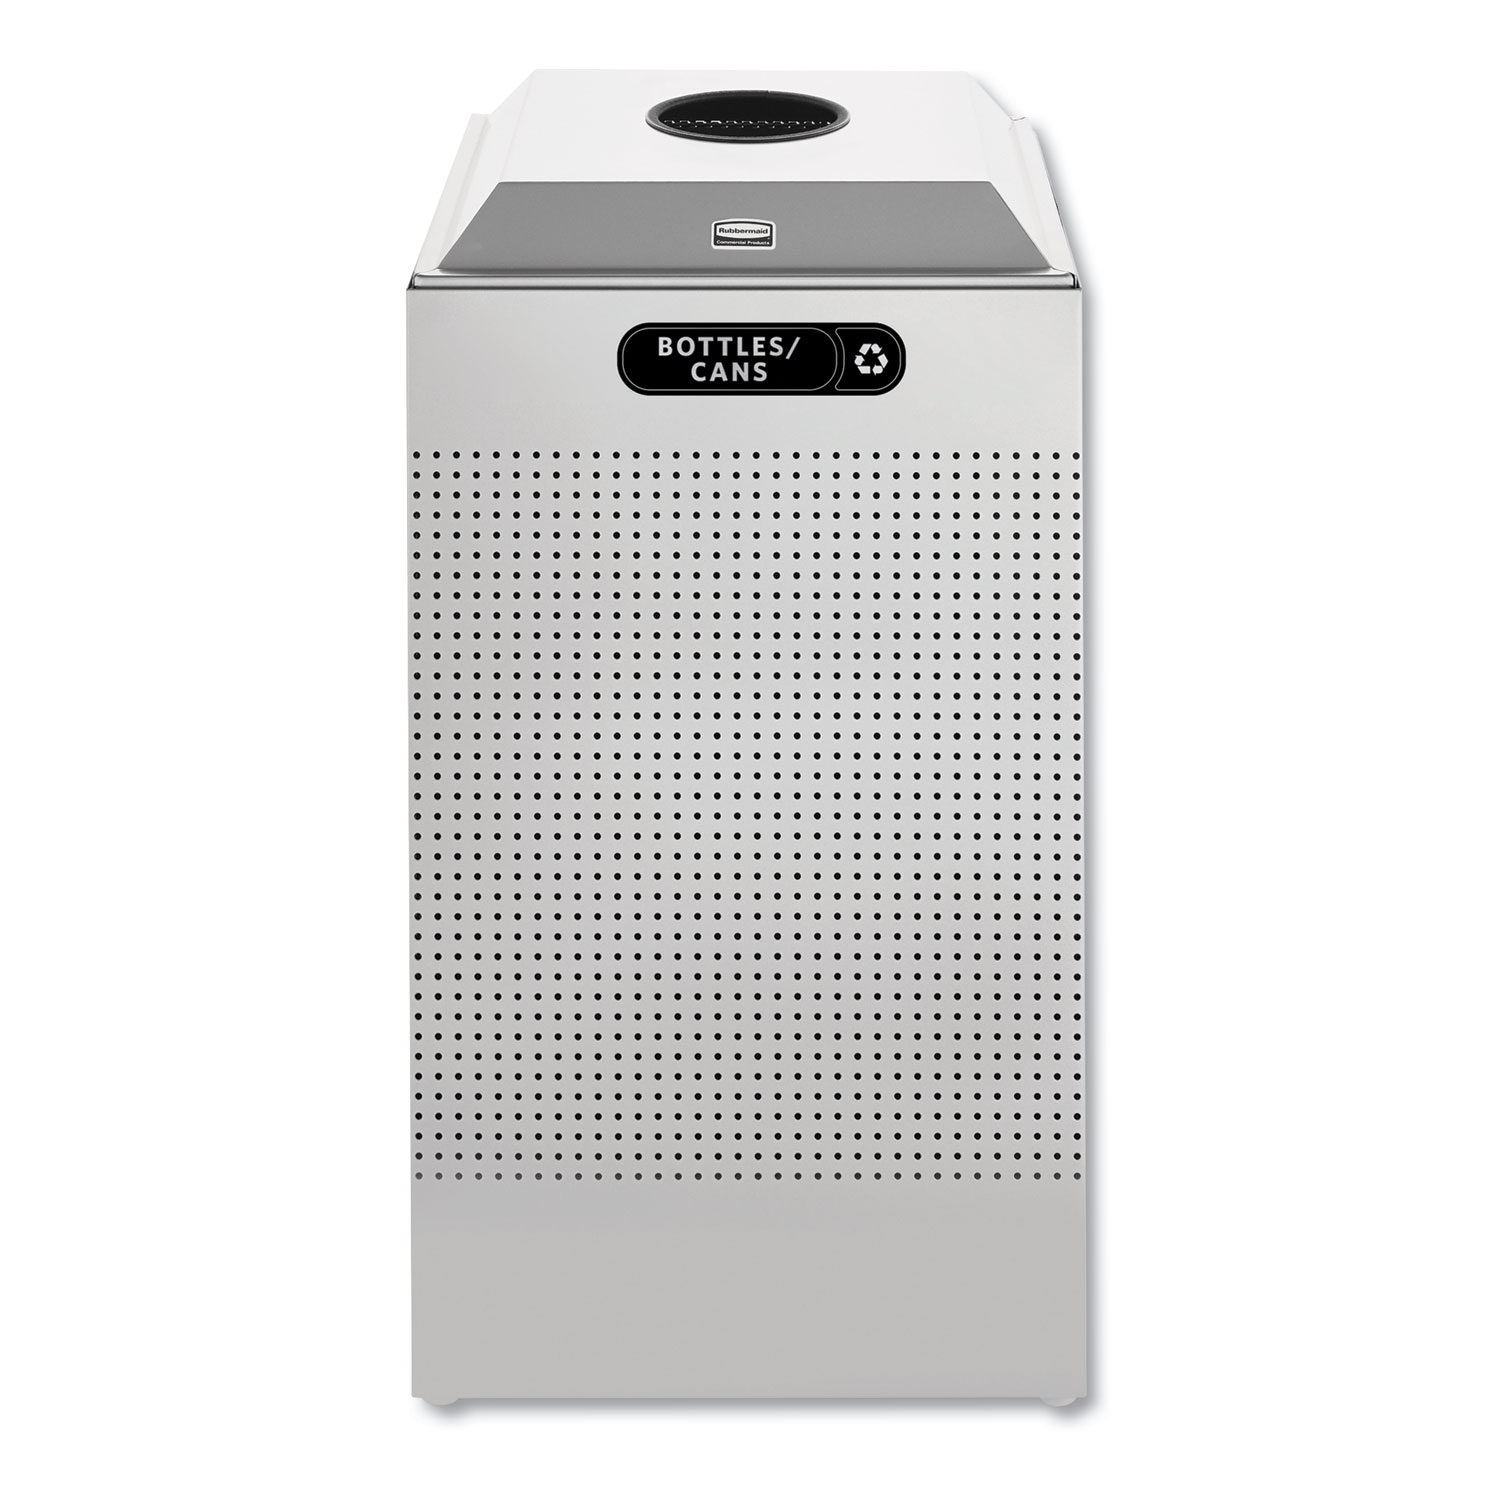 Silhouette Can/Bottle Recycling Receptacle, Square, Steel, 29gal, Silver